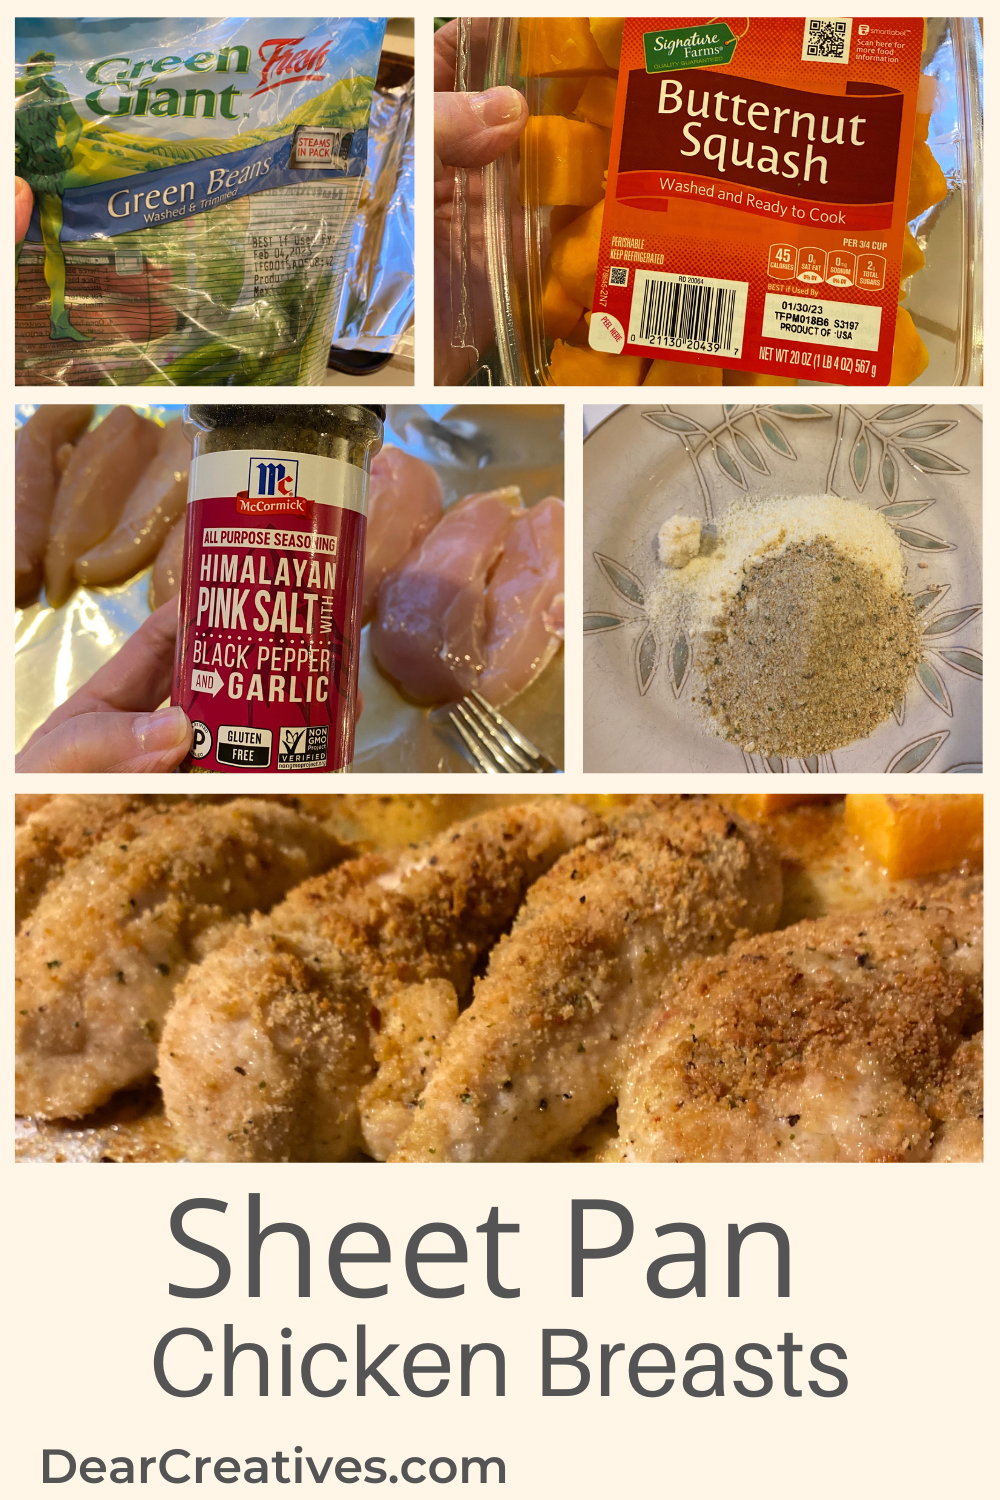 Sheet Pan Chicken Breasts - recipe and instructions for how to make breaded chicken in the oven. DearCreatives.com